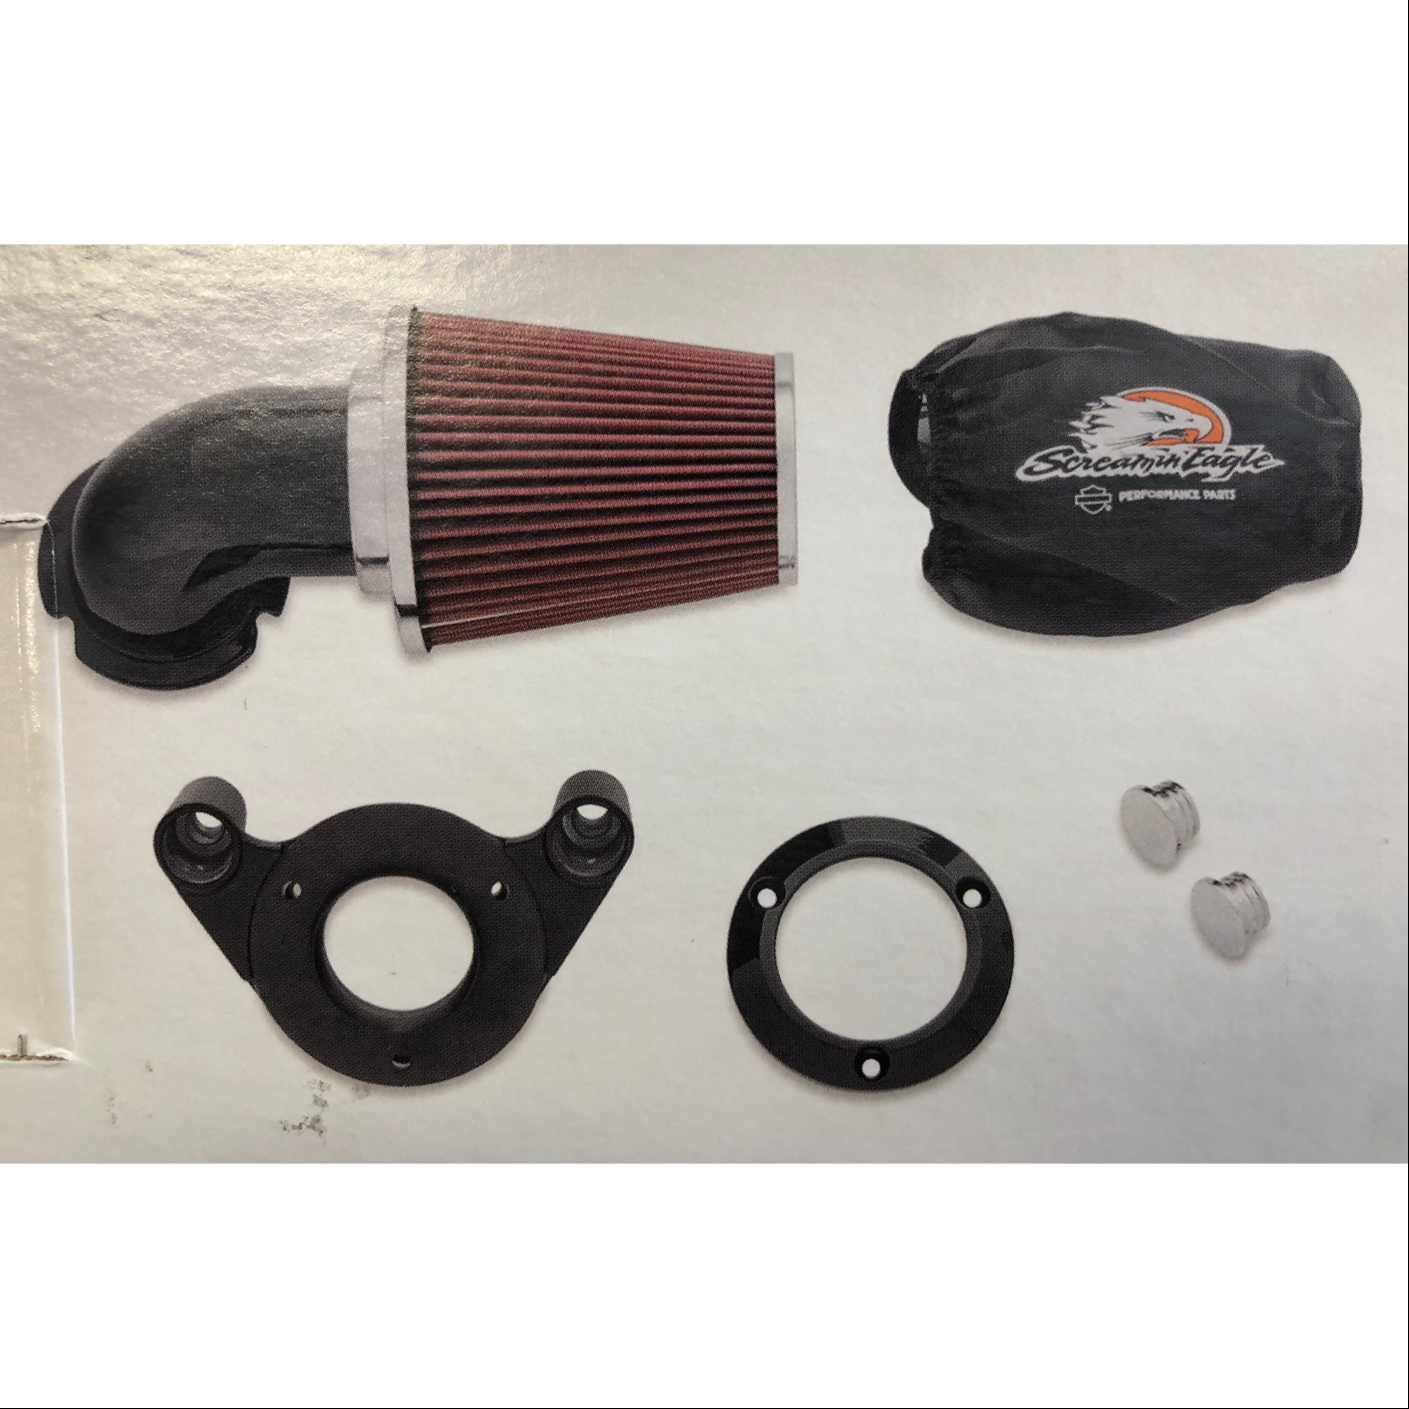 Harley-Davidson Screamin’ Eagle Heavy Breather Air Cleaner Kit - Black - 29006-09B kit contains